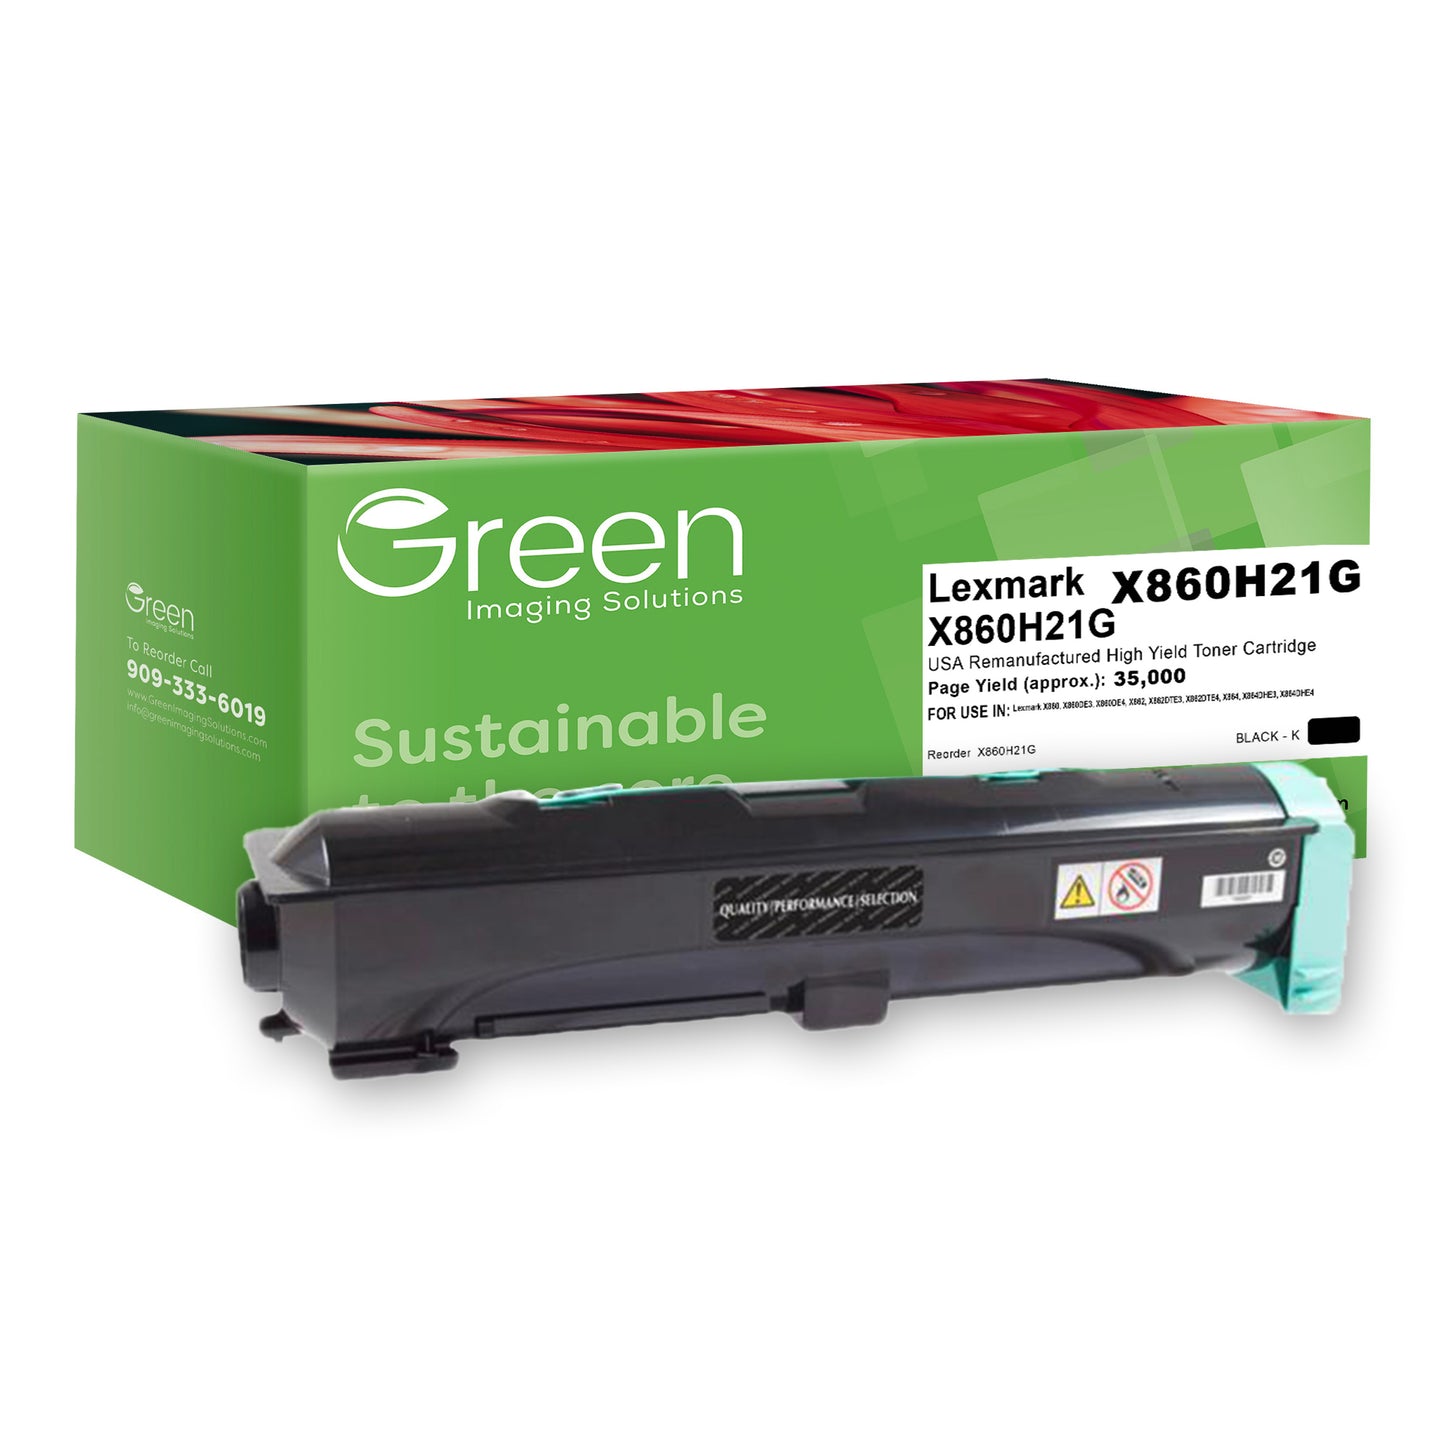 Green Imaging Solutions USA Remanufactured High Yield Toner Cartridge for Lexmark X860